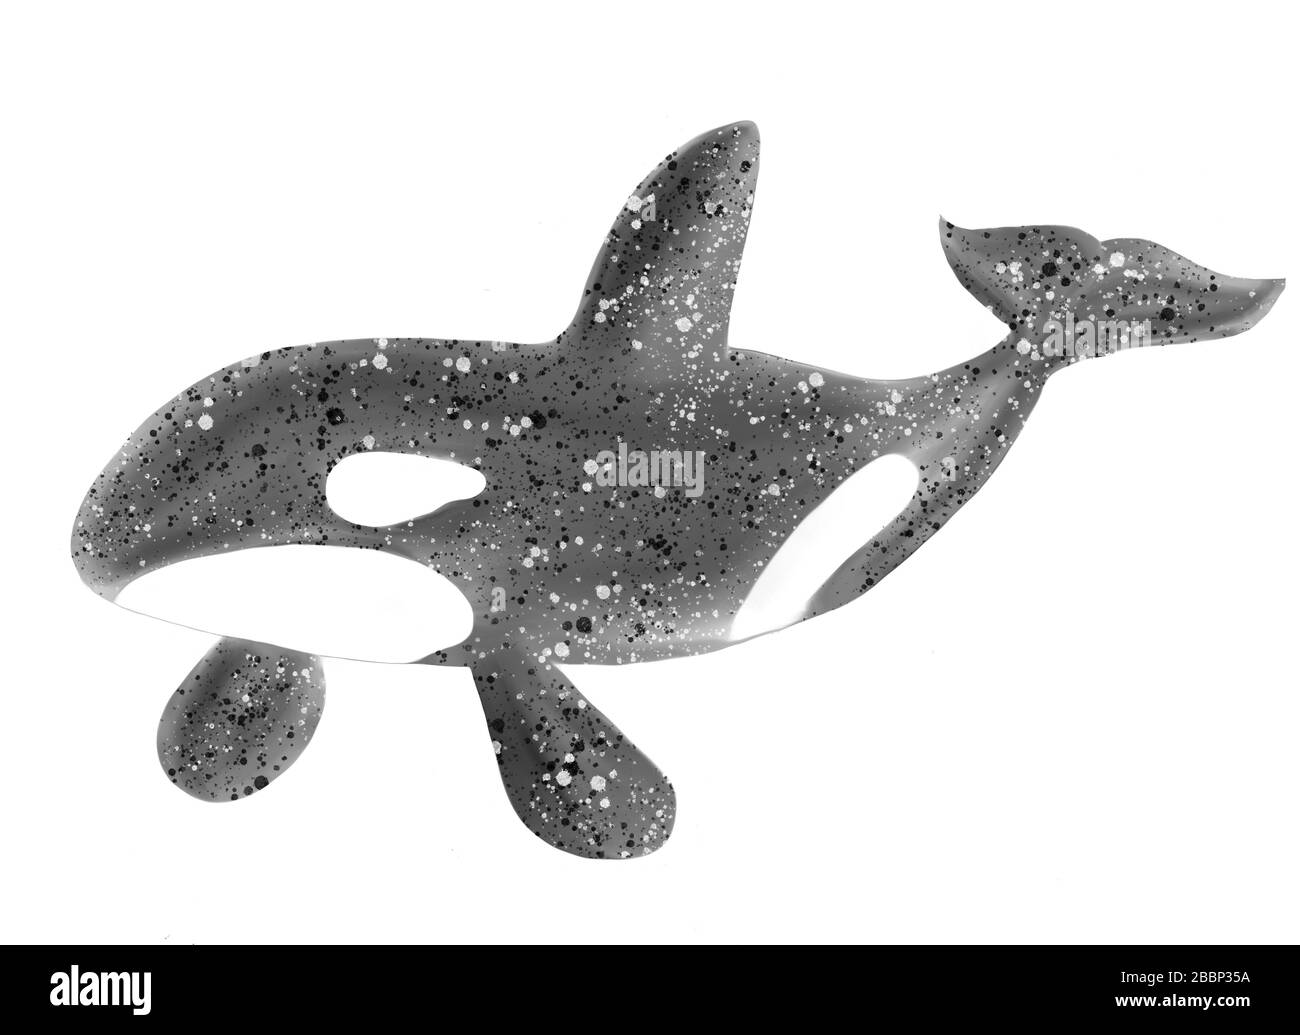 Isolated digital watercolor illustration. Killer whale orca, grampus on white background. Stock image. Stock Photo